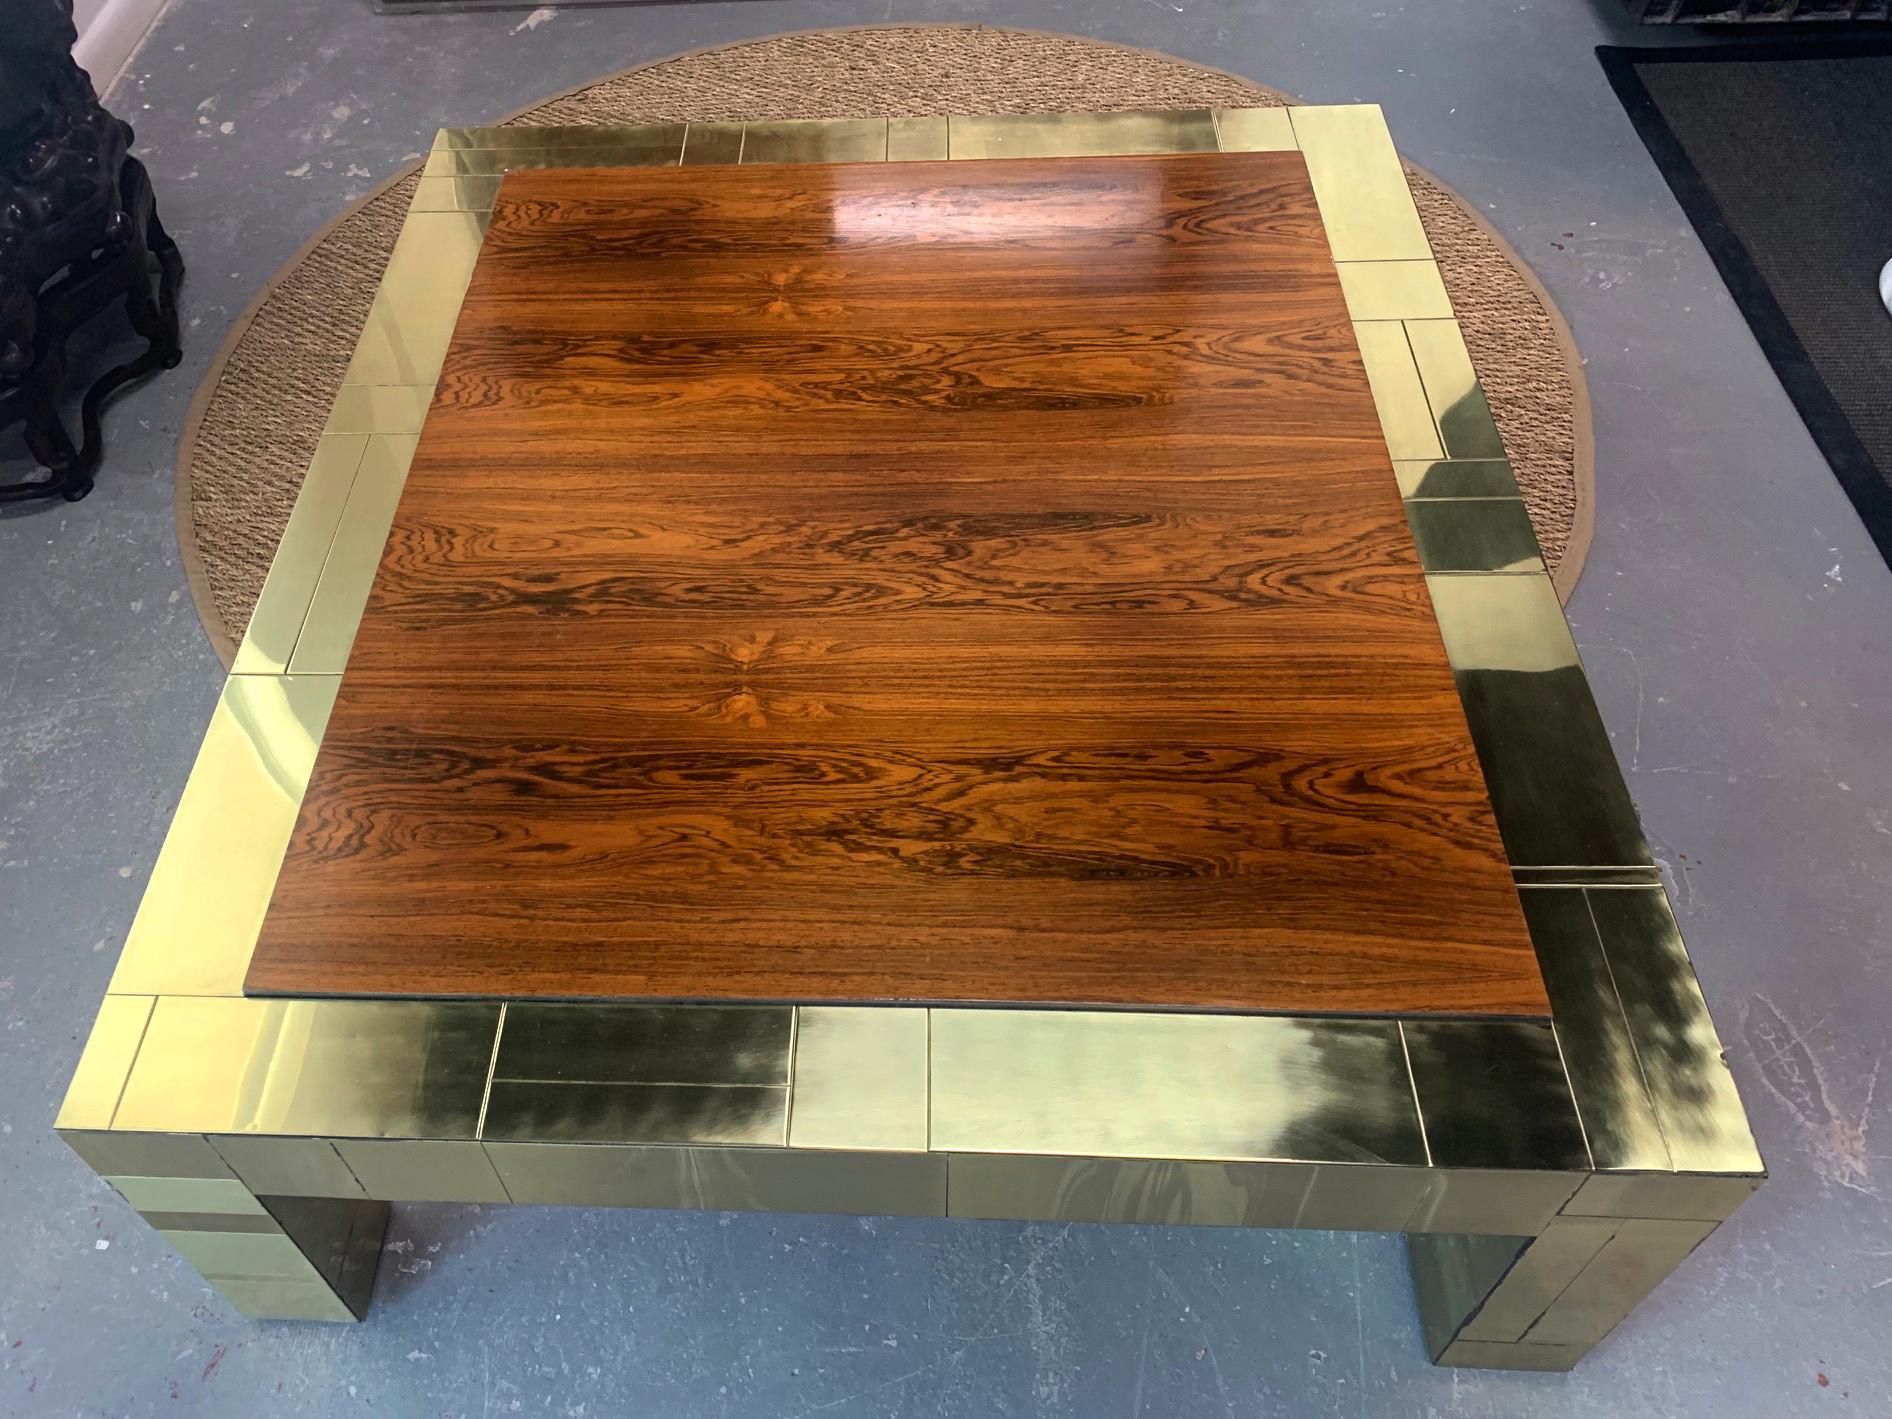 A large brass patchwork cityscape coffee table in contrast with a rather unusual Brazilian rosewood top. A very generous size with striking visual impact. This is a custom pieces executed circa 1975 by Paul Evans for Directional.